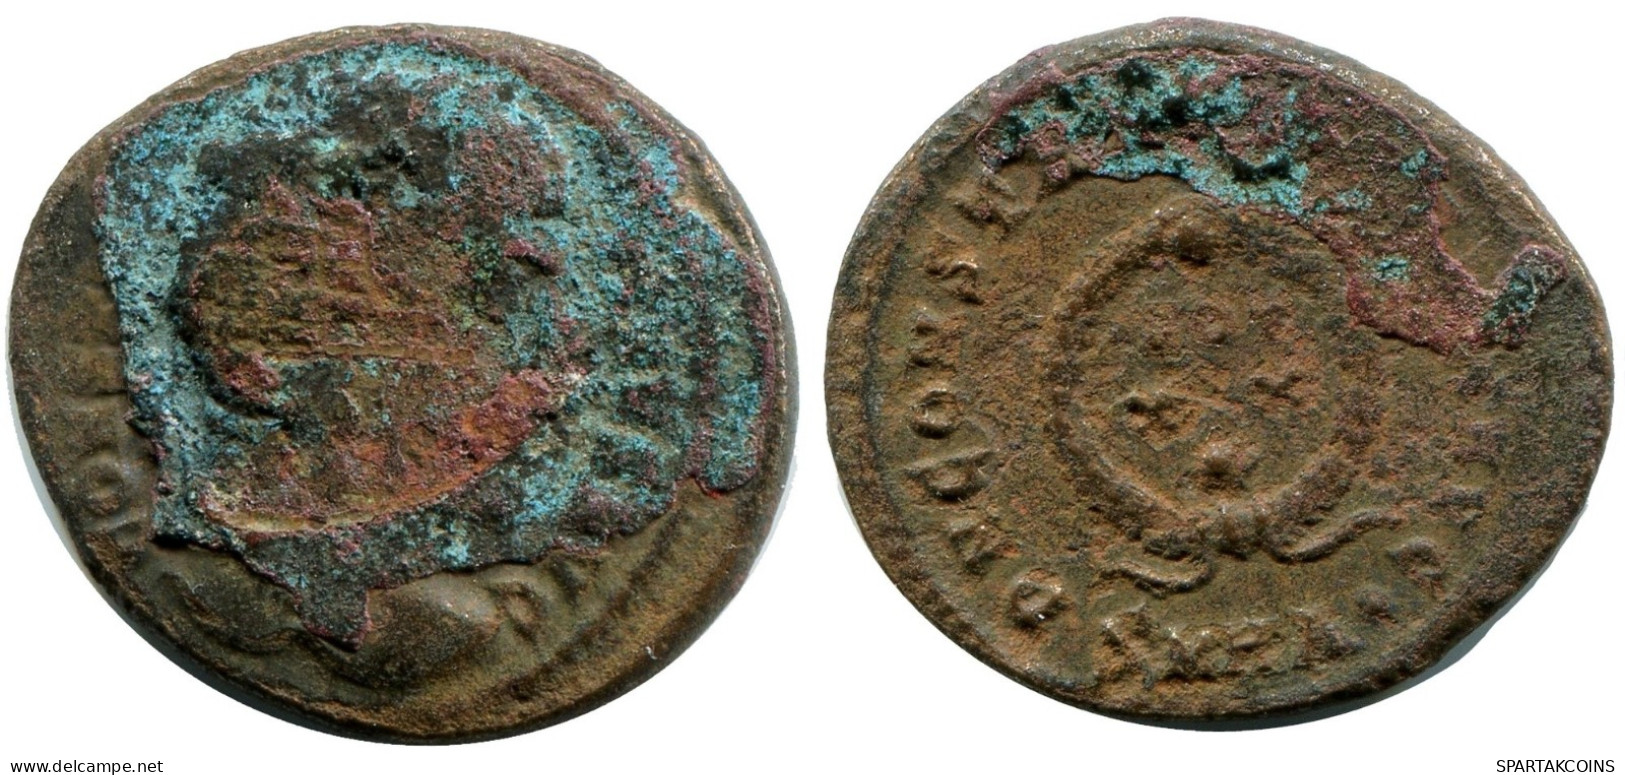 CONSTANTINE I MINTED IN HERACLEA FROM THE ROYAL ONTARIO MUSEUM #ANC11202.14.U.A - El Imperio Christiano (307 / 363)